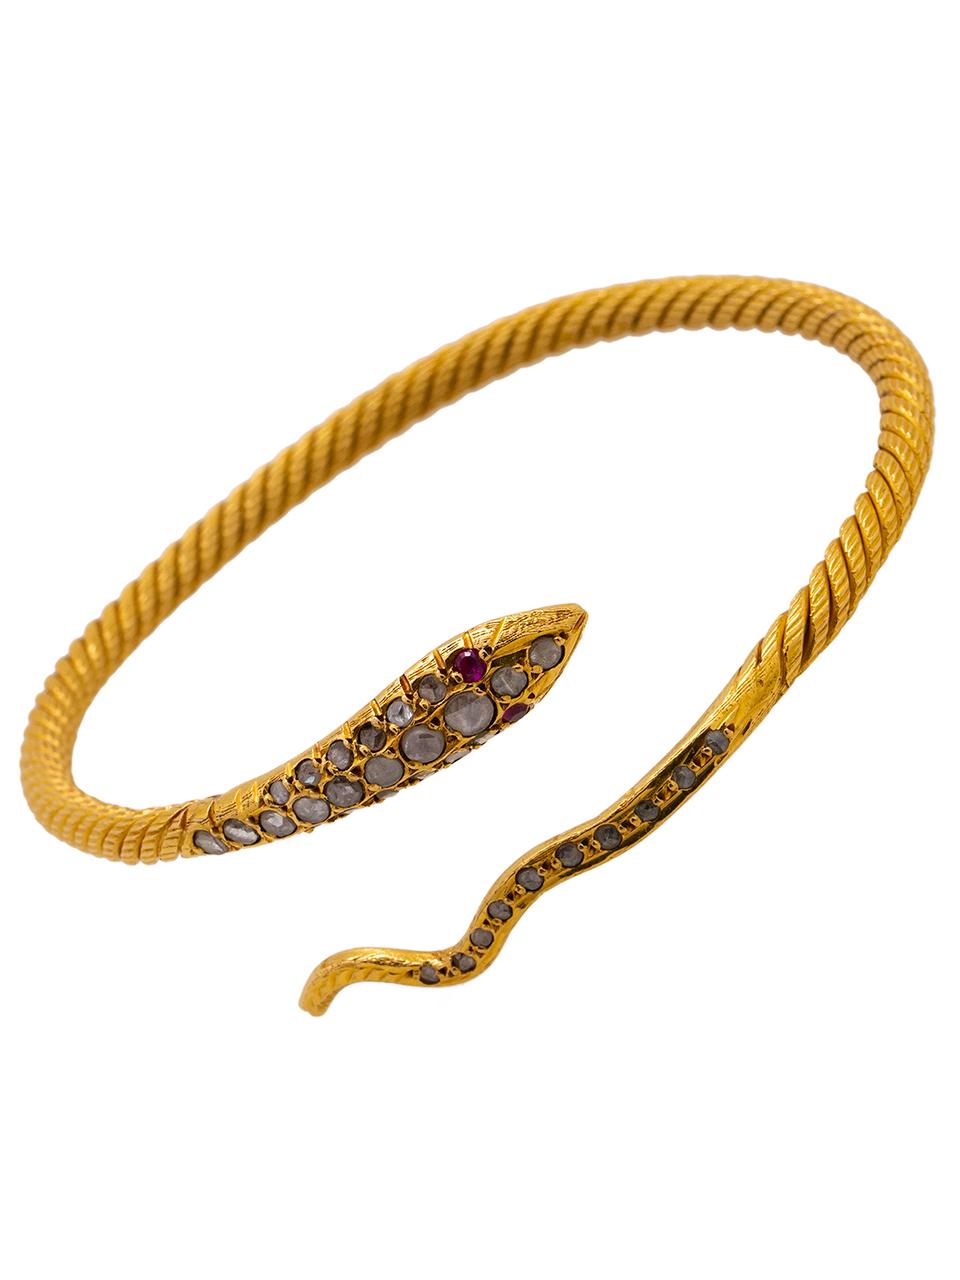 
22K Yellow Gold Serpent design bracelet with twisted cross hatched texture and Egyptian hallmarks. Serpent head and tail decorated with rose cut diamonds, eyes set with rubies. Overall weight 32.3 grams. Can be worn on the wrist, or higher up on